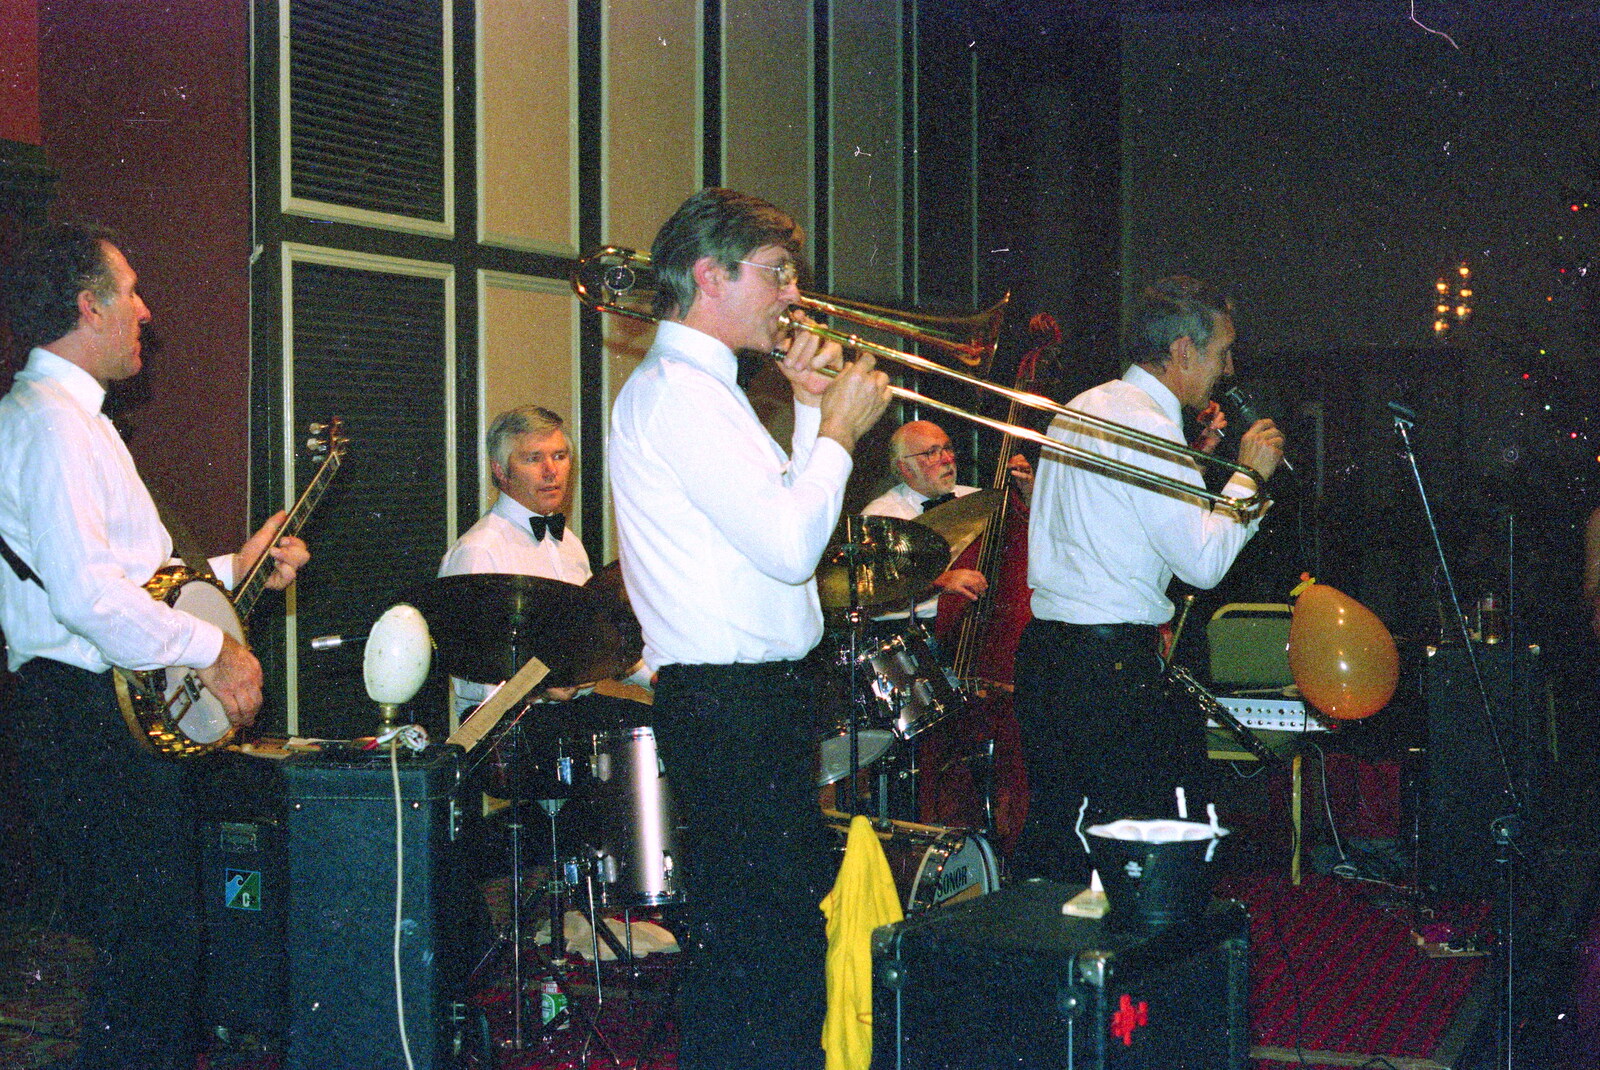 The band at the BABS Ball do their thing from Uni: BABS Christmas Ball and a Beaumont Street Party, Plymouth - 16th December 1985